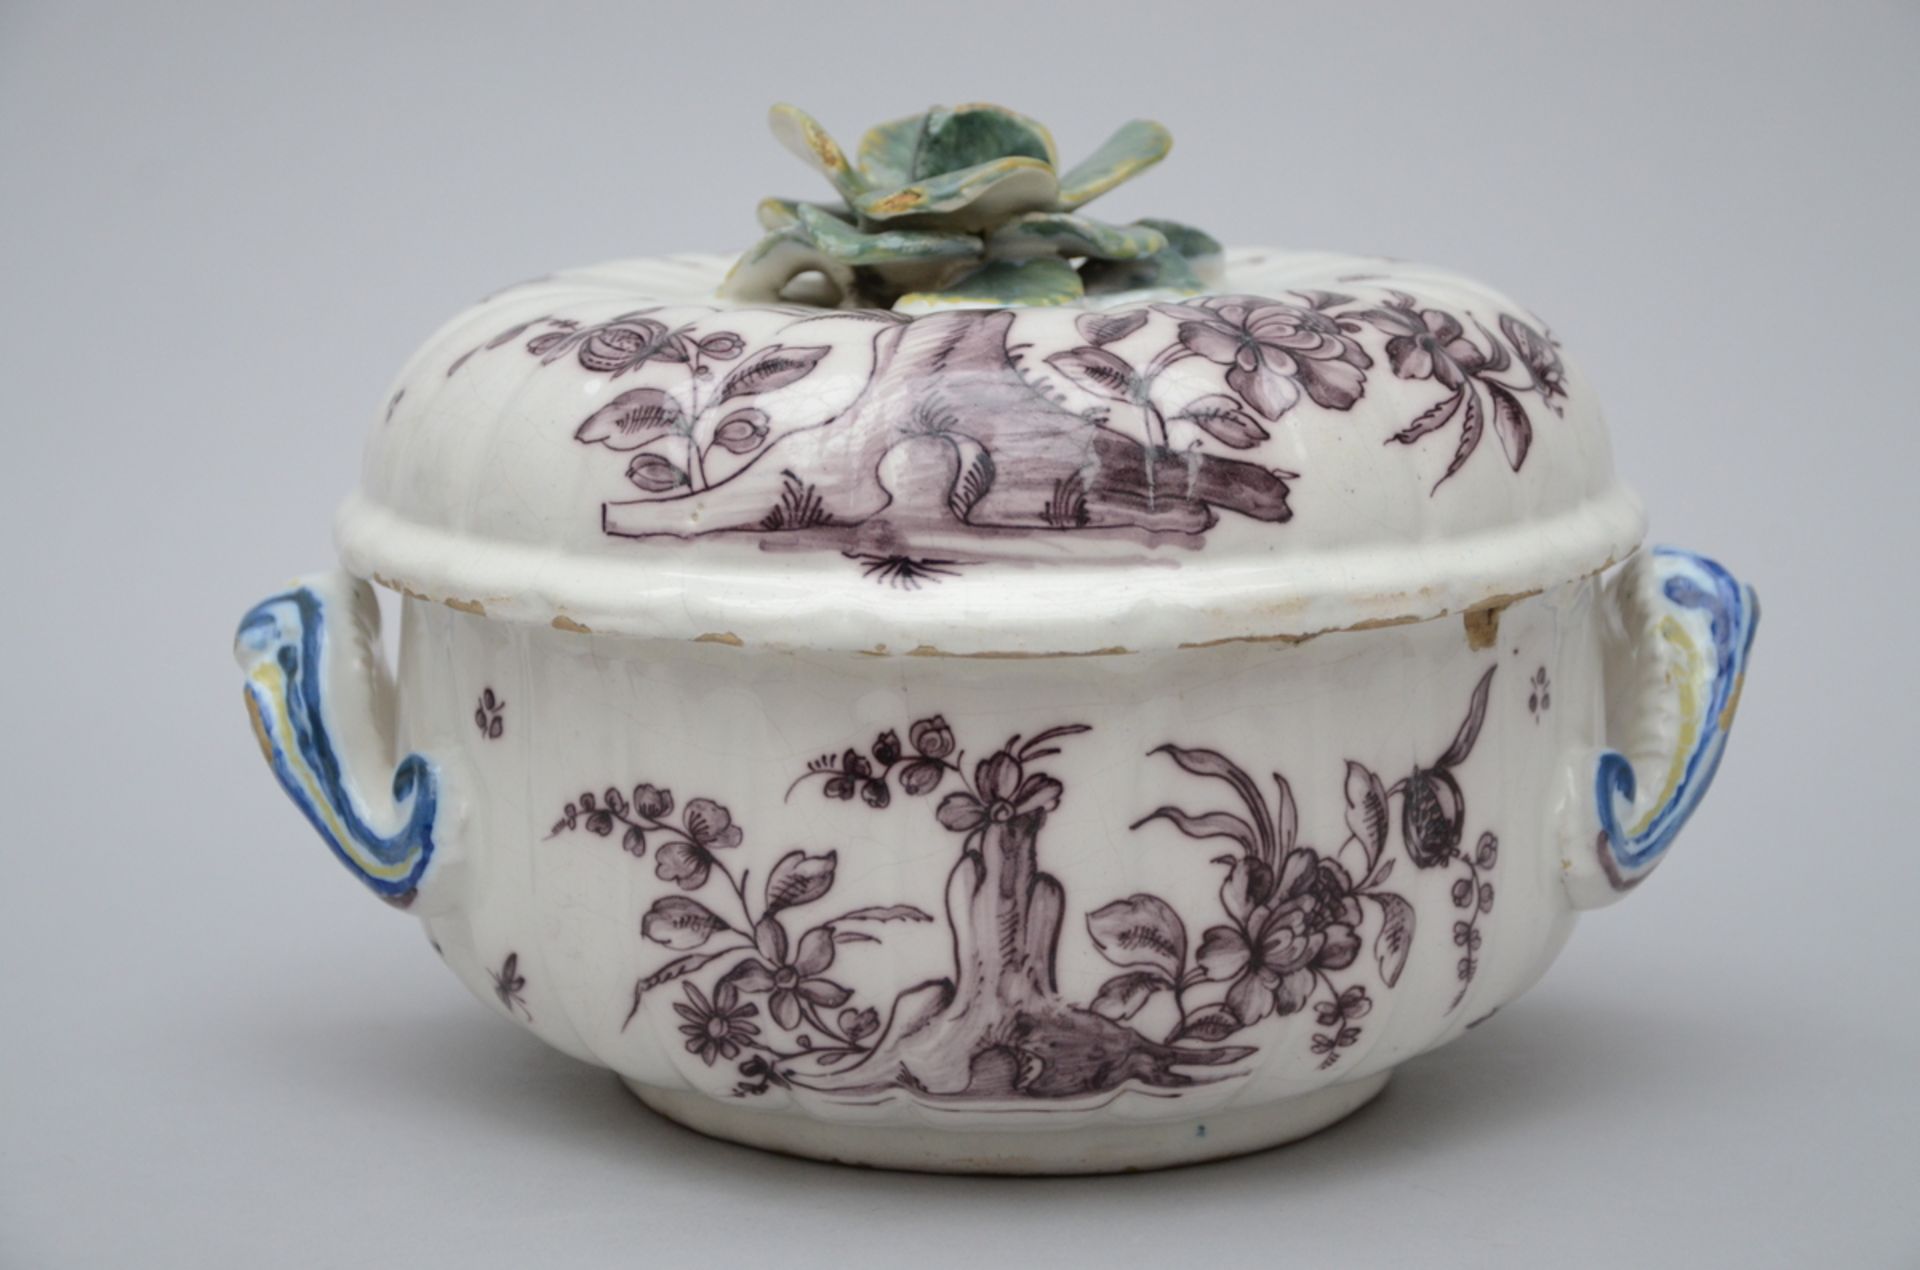 A 'manganèse' tureen in faience from Saint-Omer, 18th century (18x23 cm) - Image 2 of 4